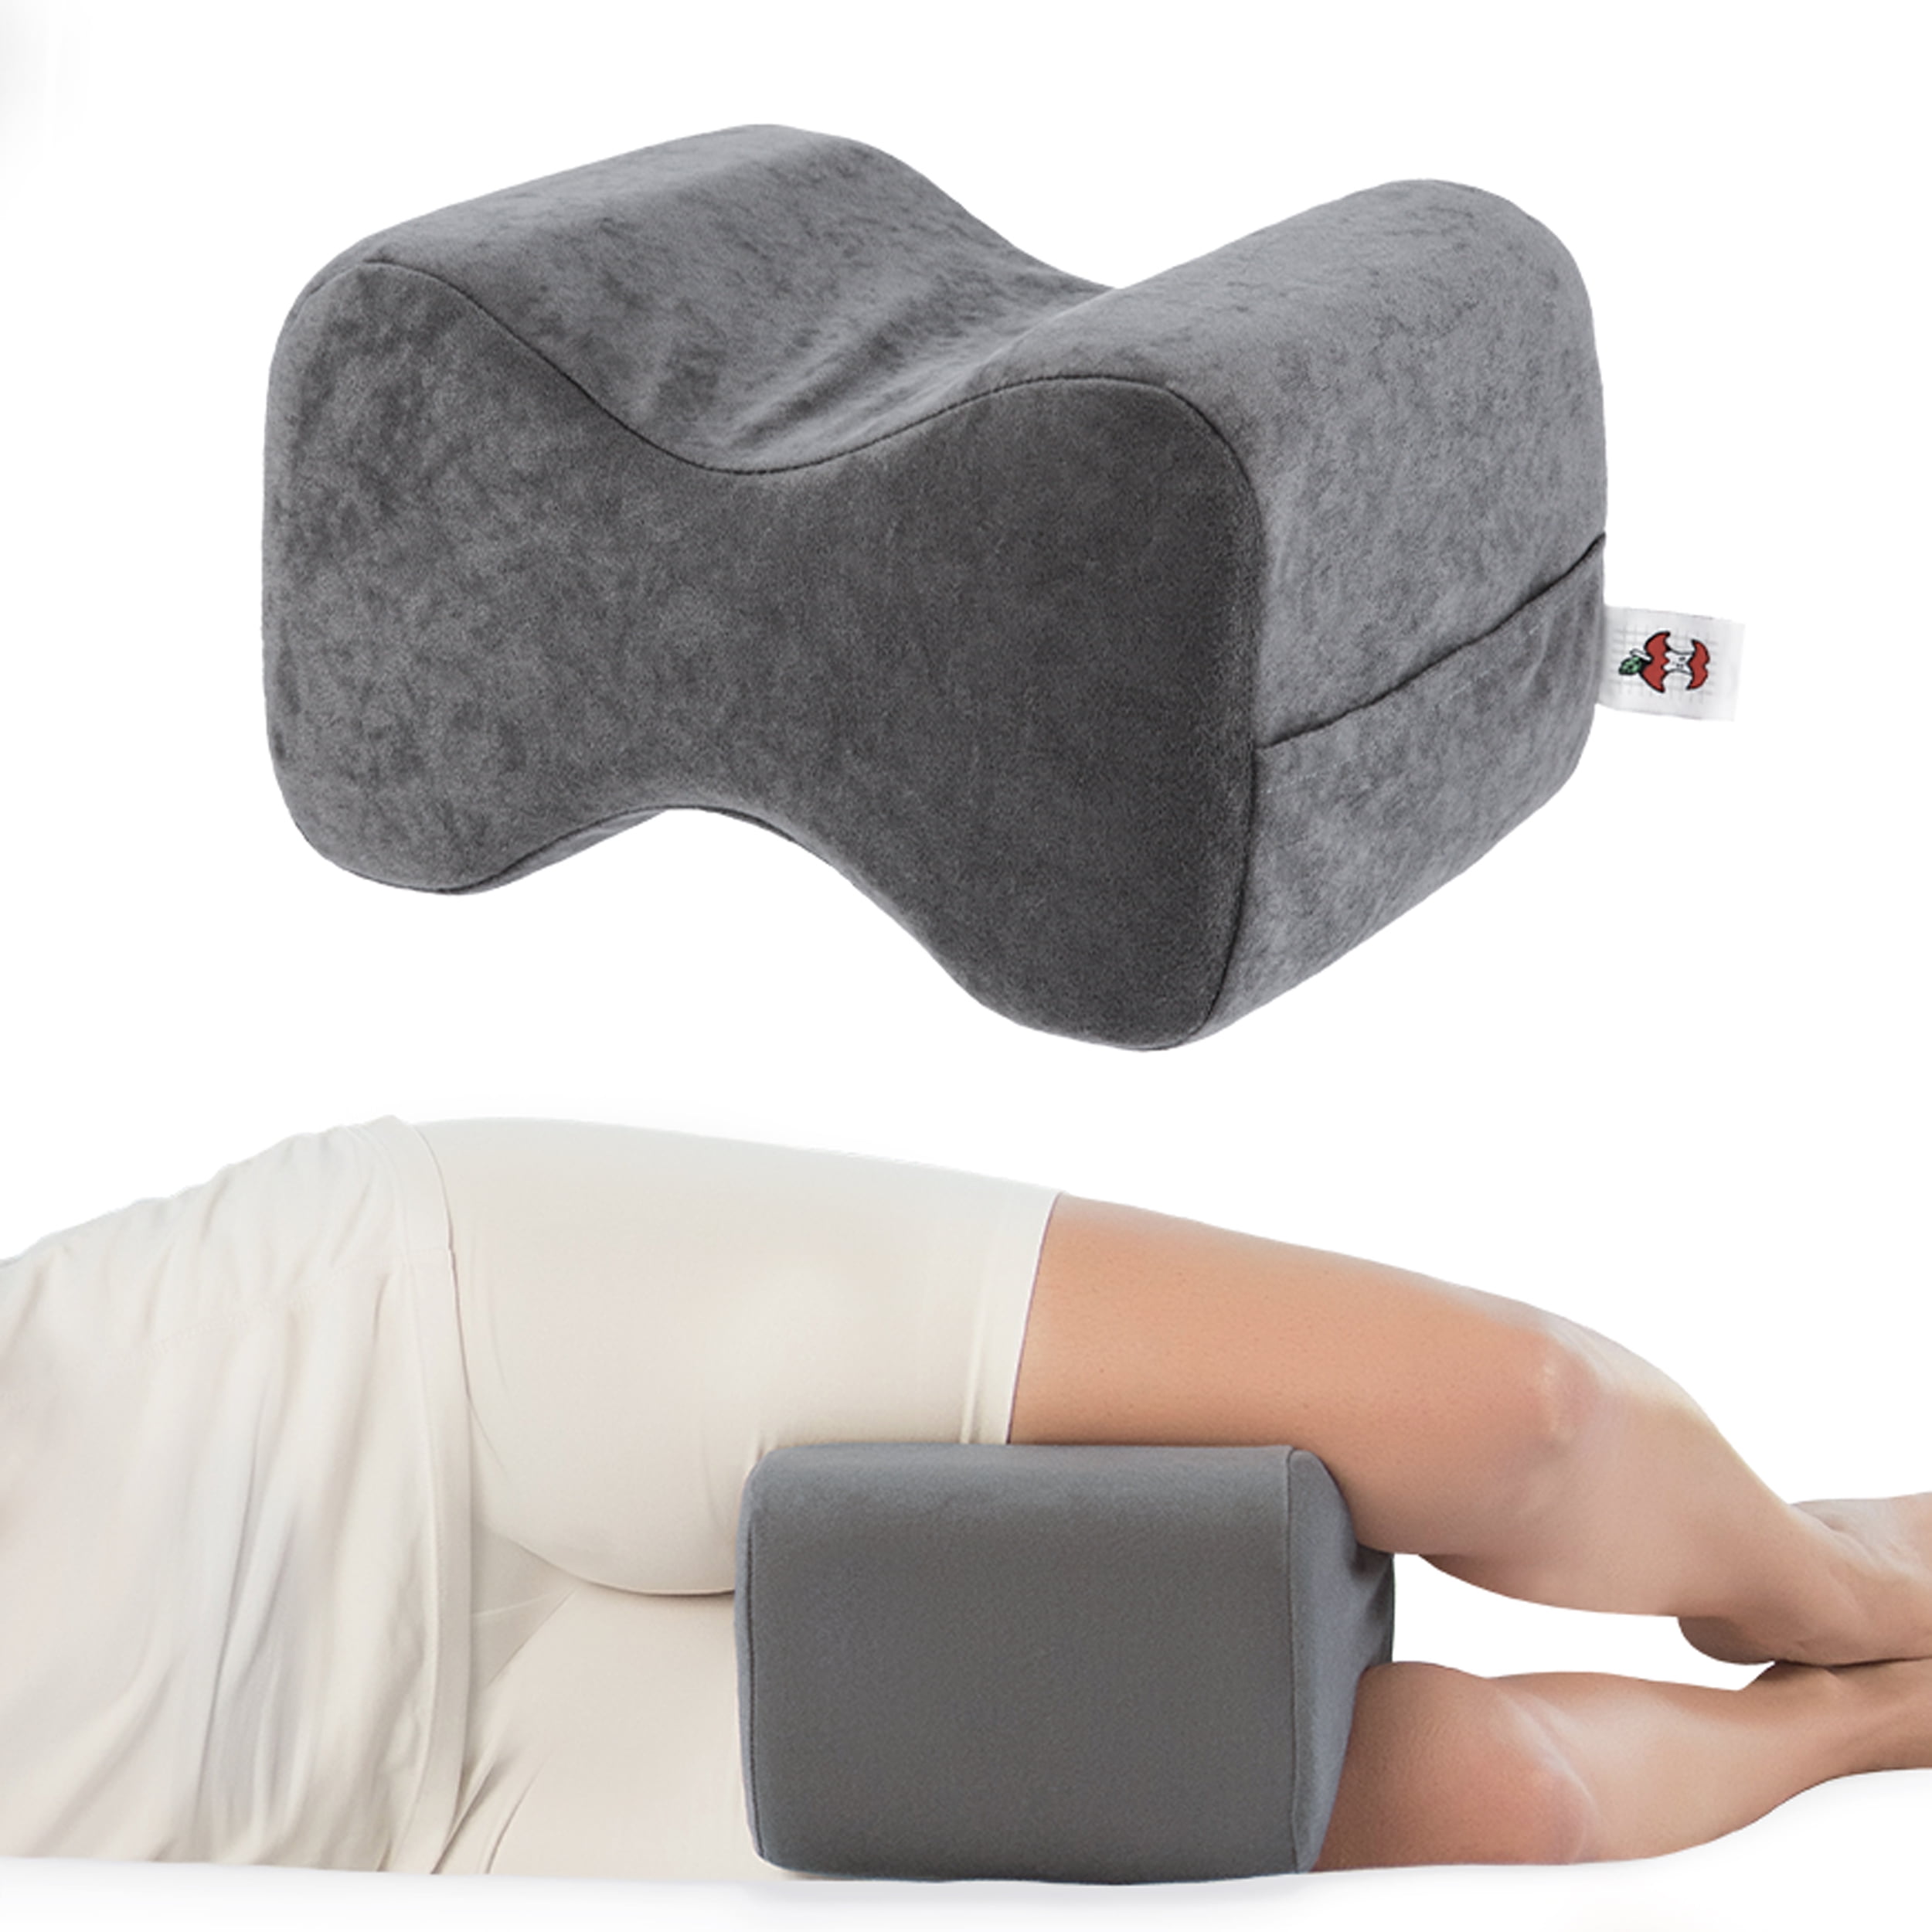 ProHeal Leg Elevation Pillow - Knee, Hip, And Back Support